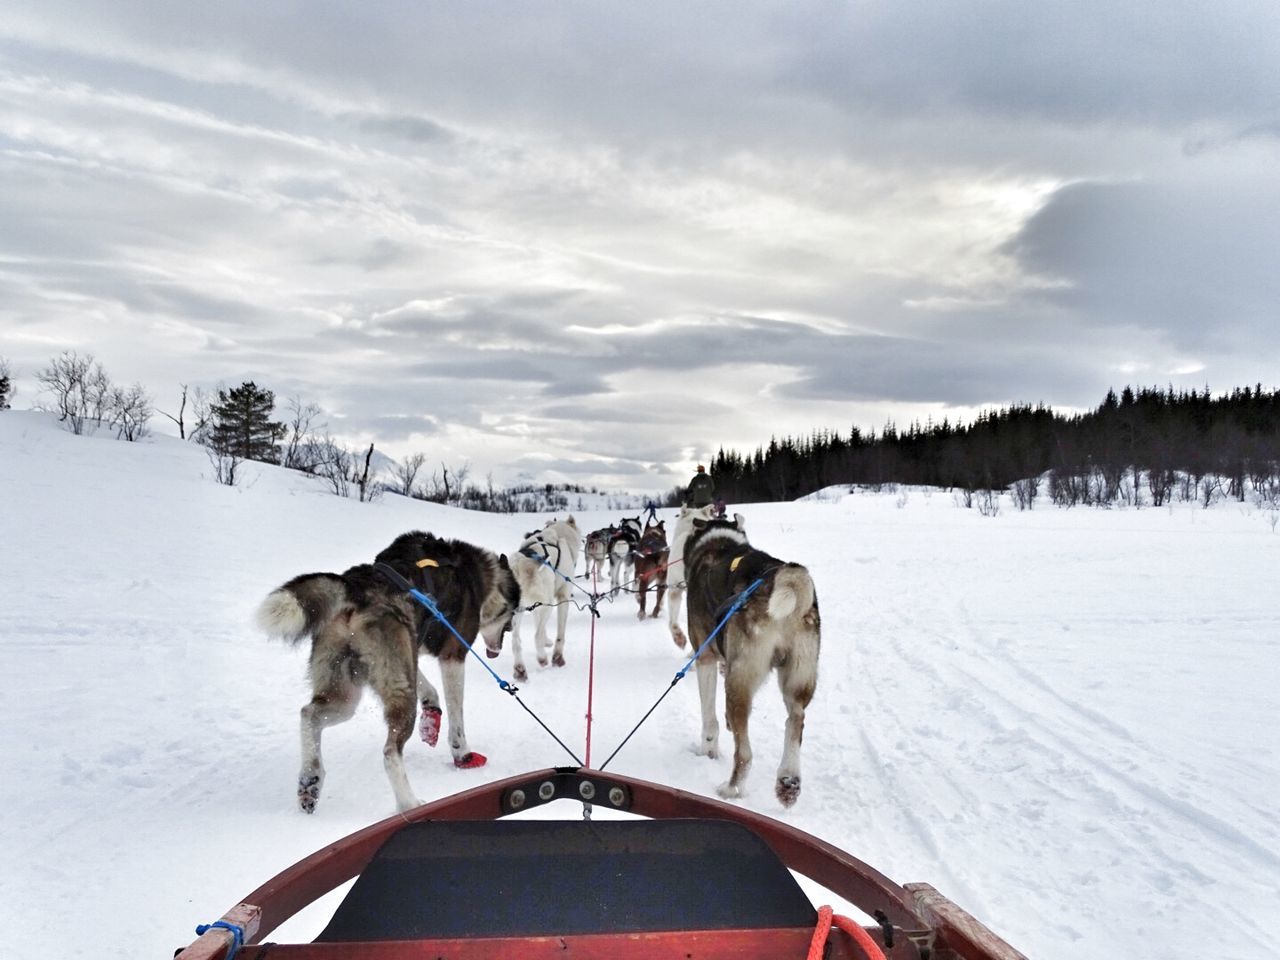 Rear view of sled dogs pulling sleigh on snowy landscape